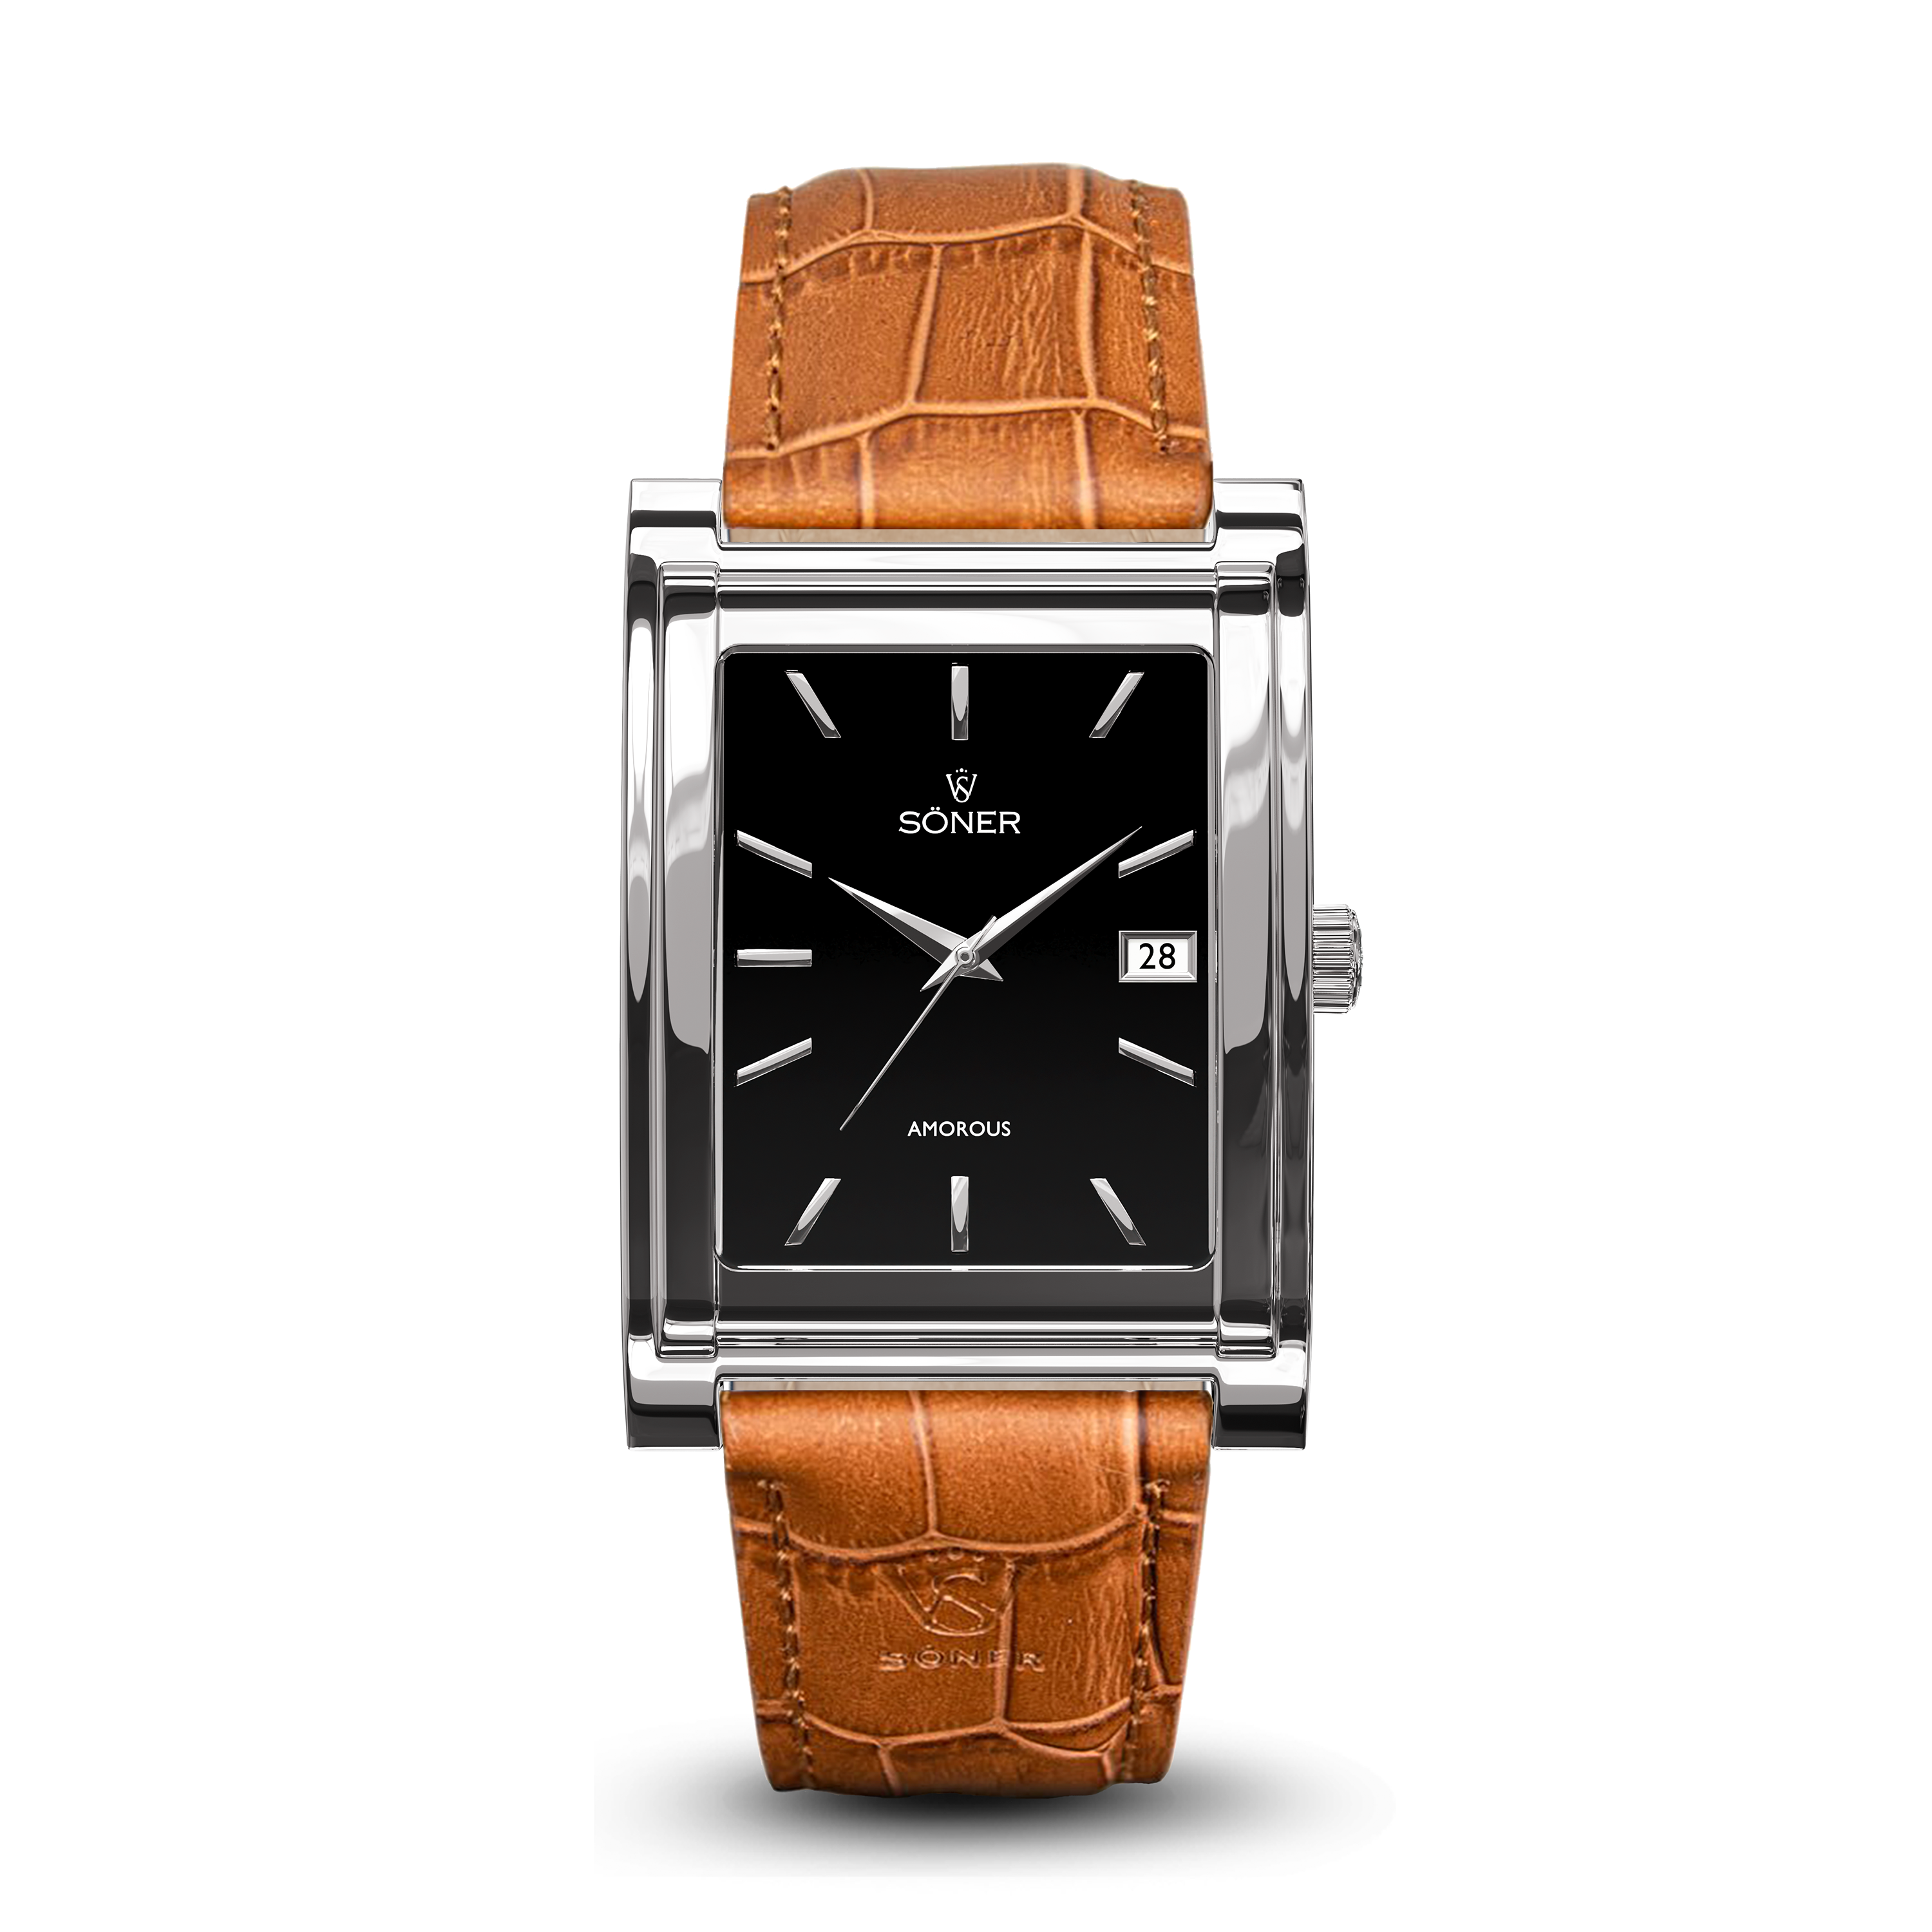 Square automatic watch, Amorous Barcelona with black dial - light brown alligator pattern leather strap front view